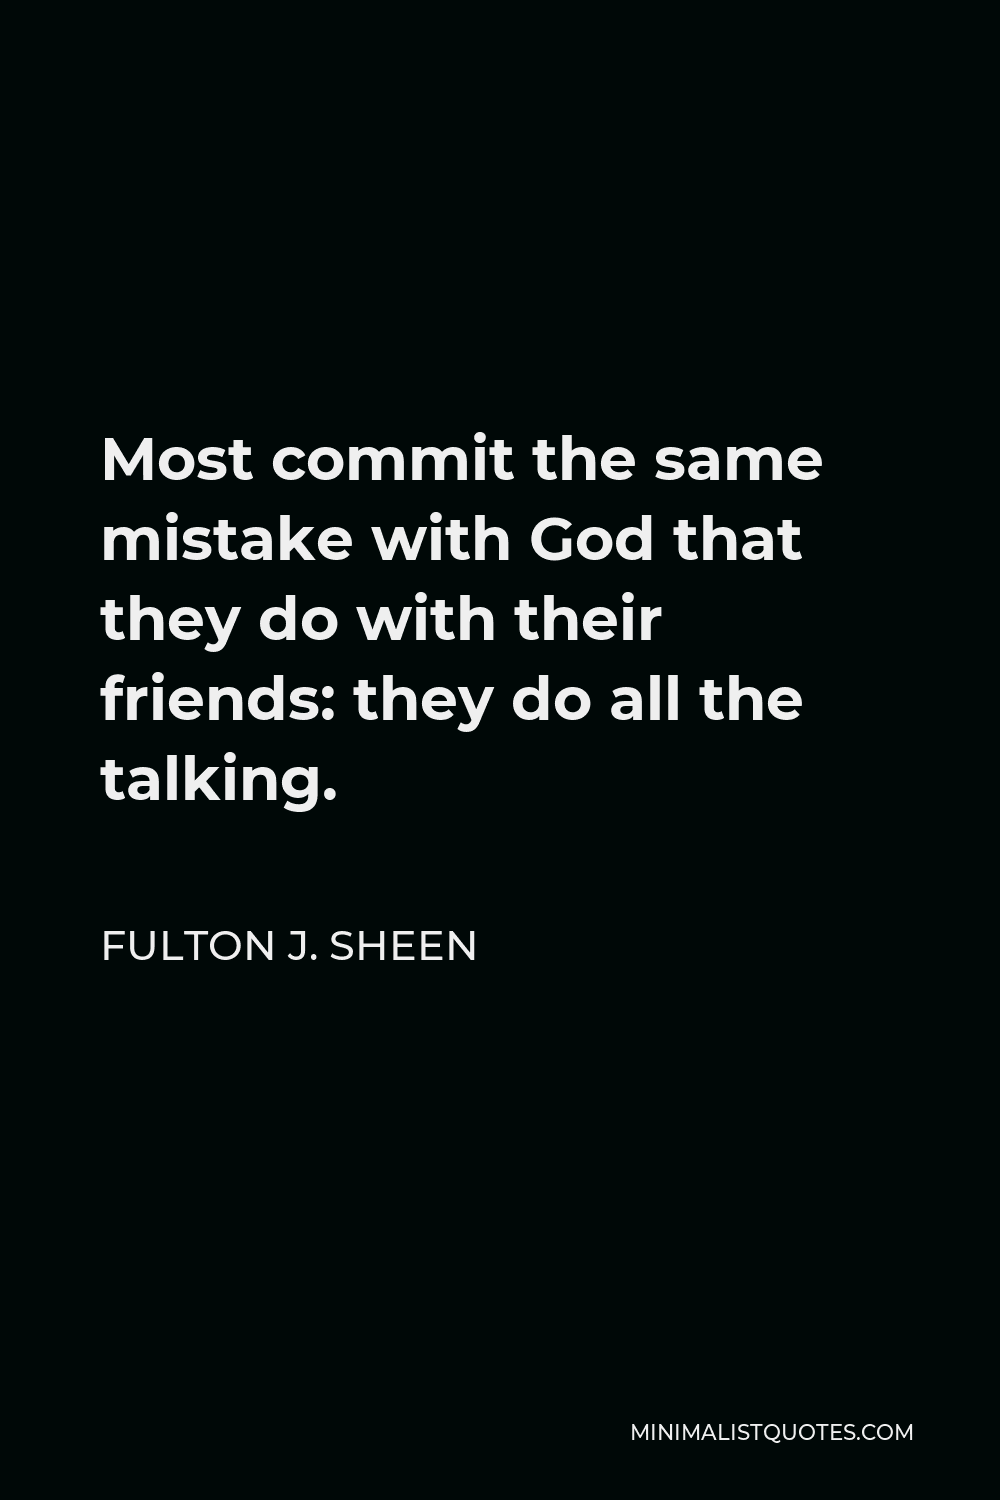 Fulton J. Sheen Quote - Most commit the same mistake with God that they do with their friends: they do all the talking.